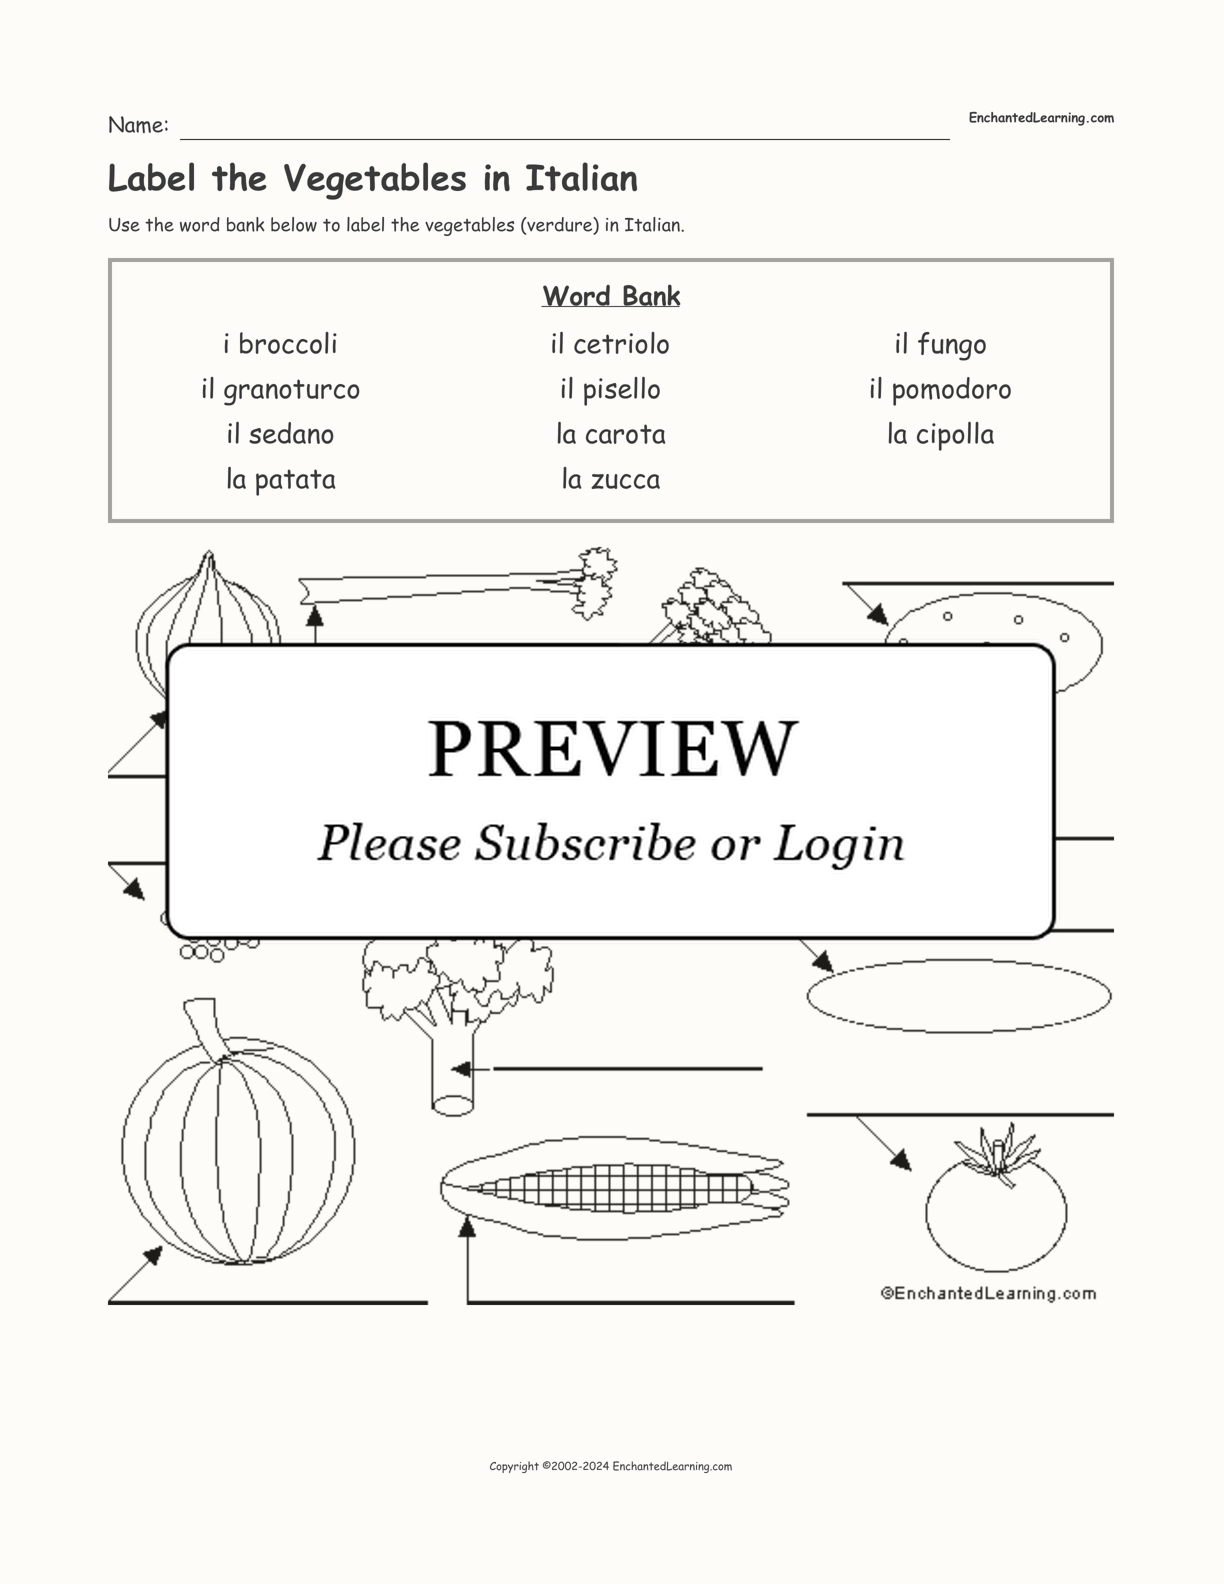 Label the Vegetables in Italian interactive worksheet page 1